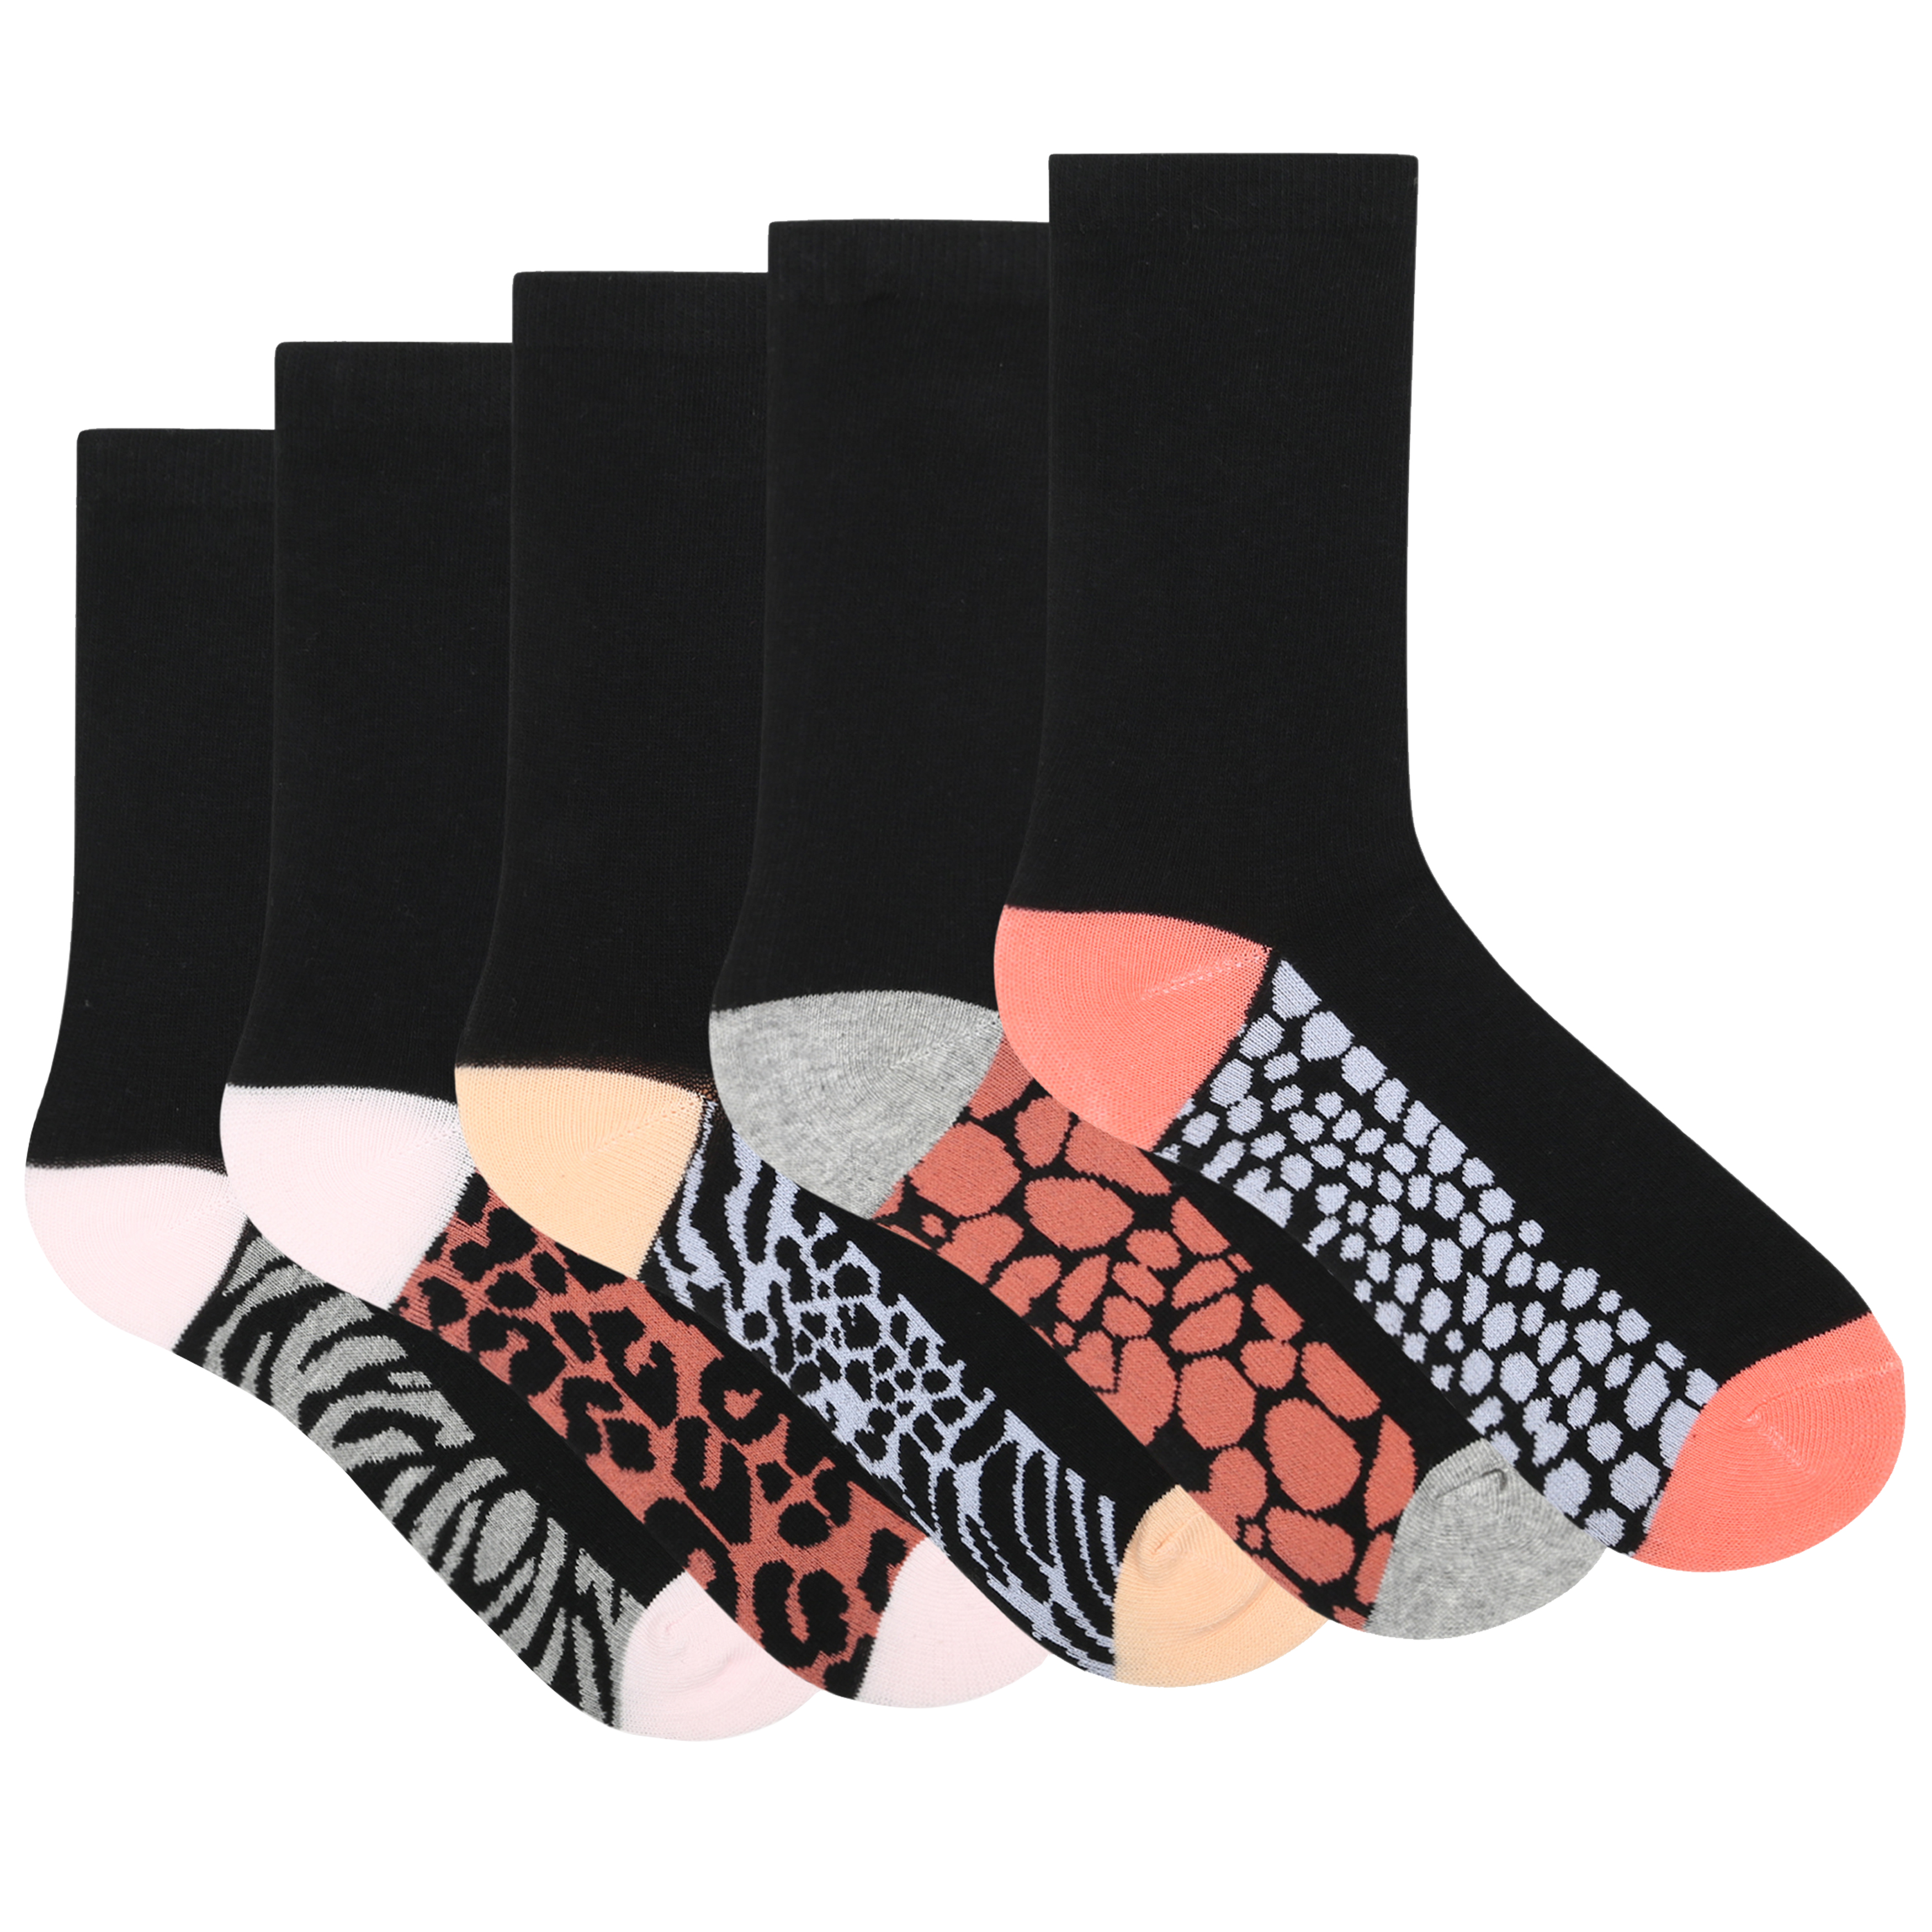 Ladies 5 Pack Side By Side Design Socks Coloured Bright Cotton Rich Premium Size 4-8